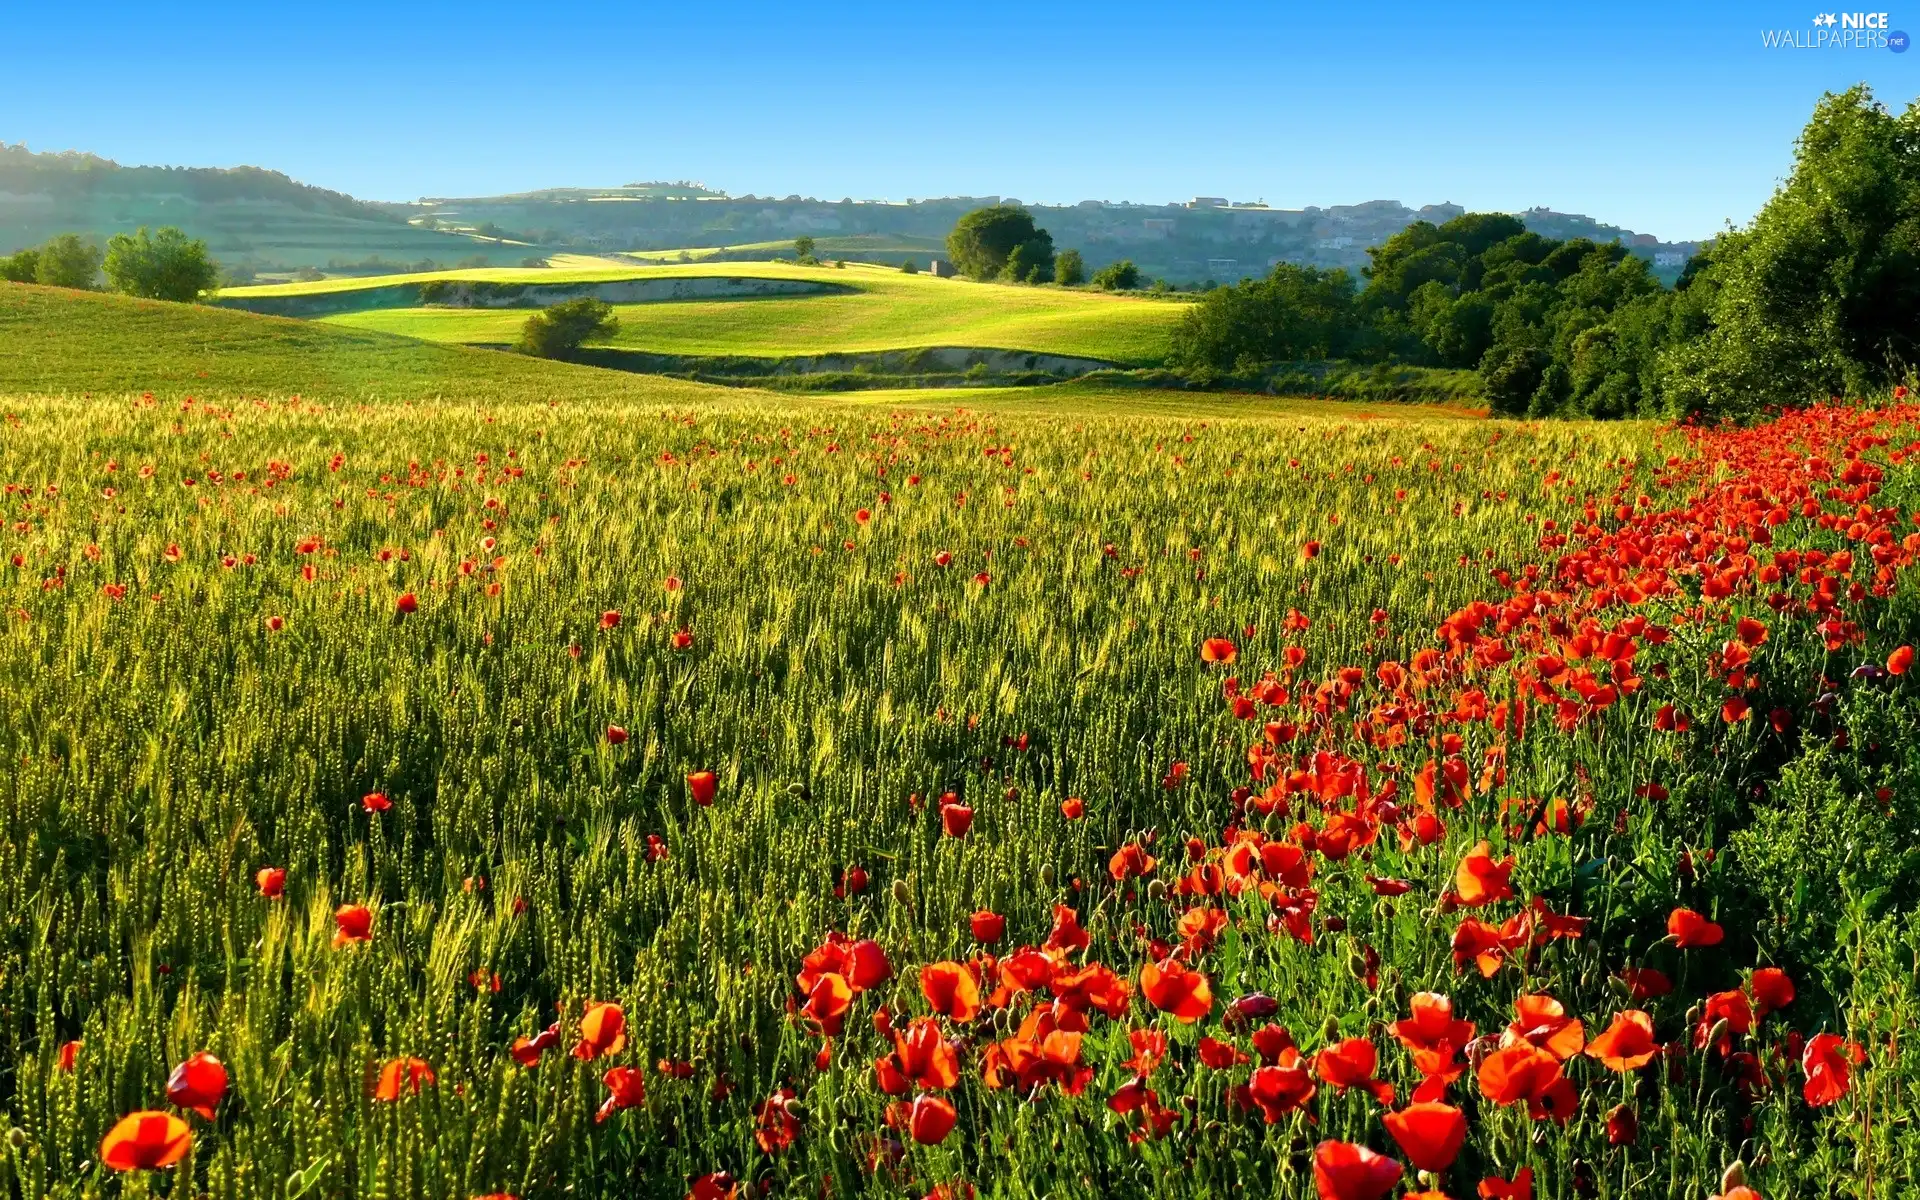 papavers, Ears, trees, Red, Field, The Hills, viewes